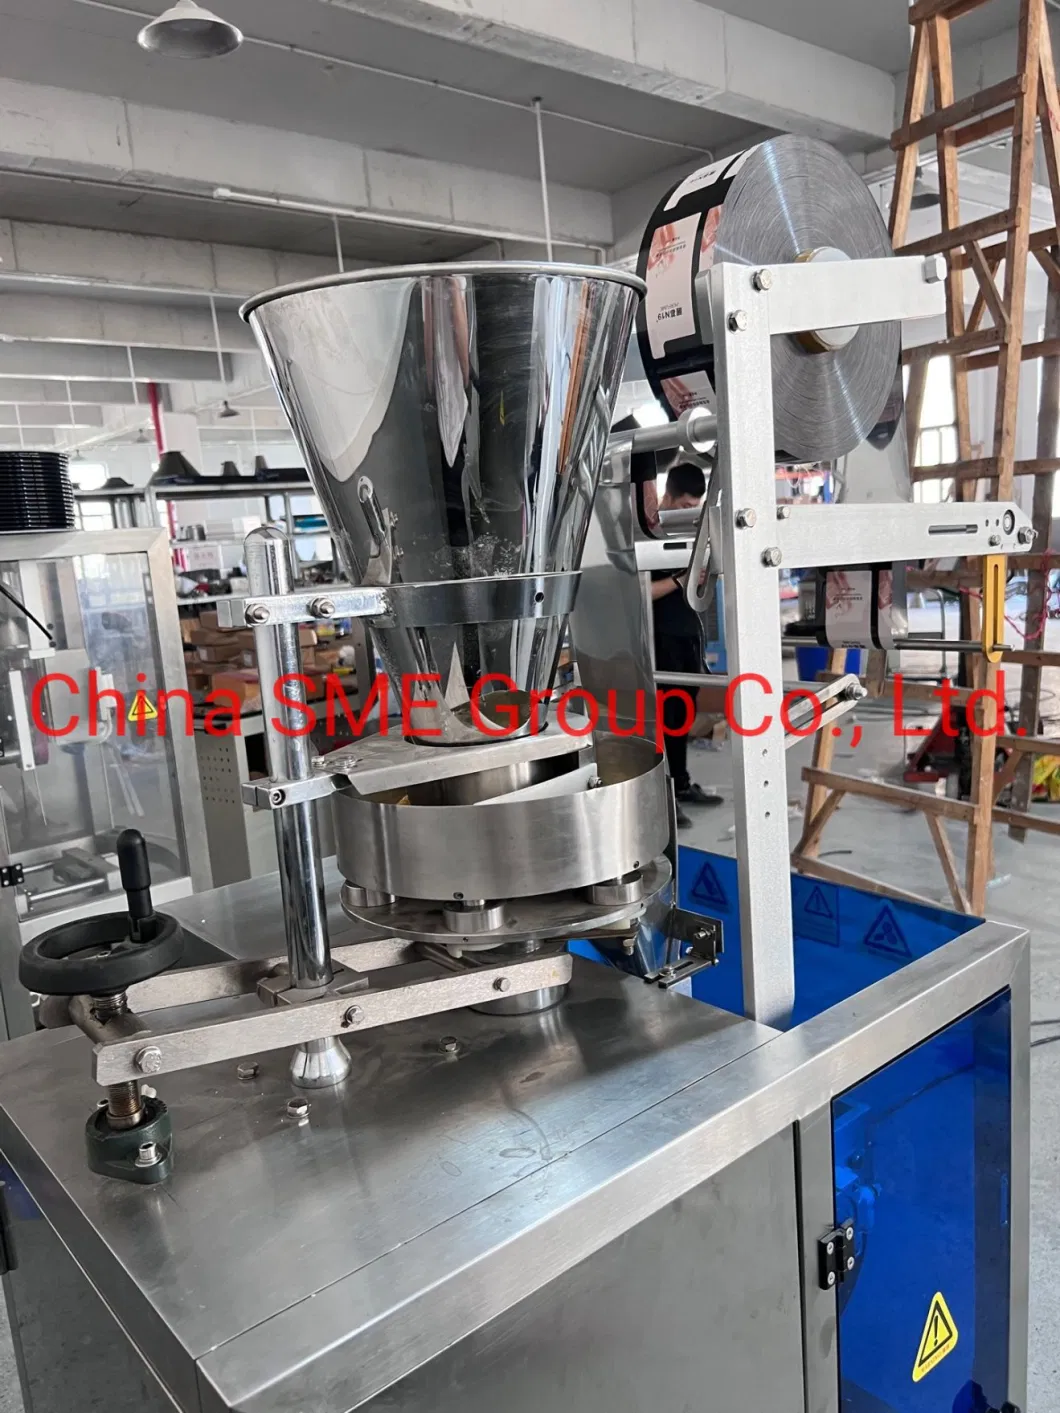 Loose Rounded Granules in The Pharmaceutical, Food, Chemical, and Other Industries. Such as Puffed Granules, Peanuts, Melon Seeds, Rice, Seeds, Pack Machine